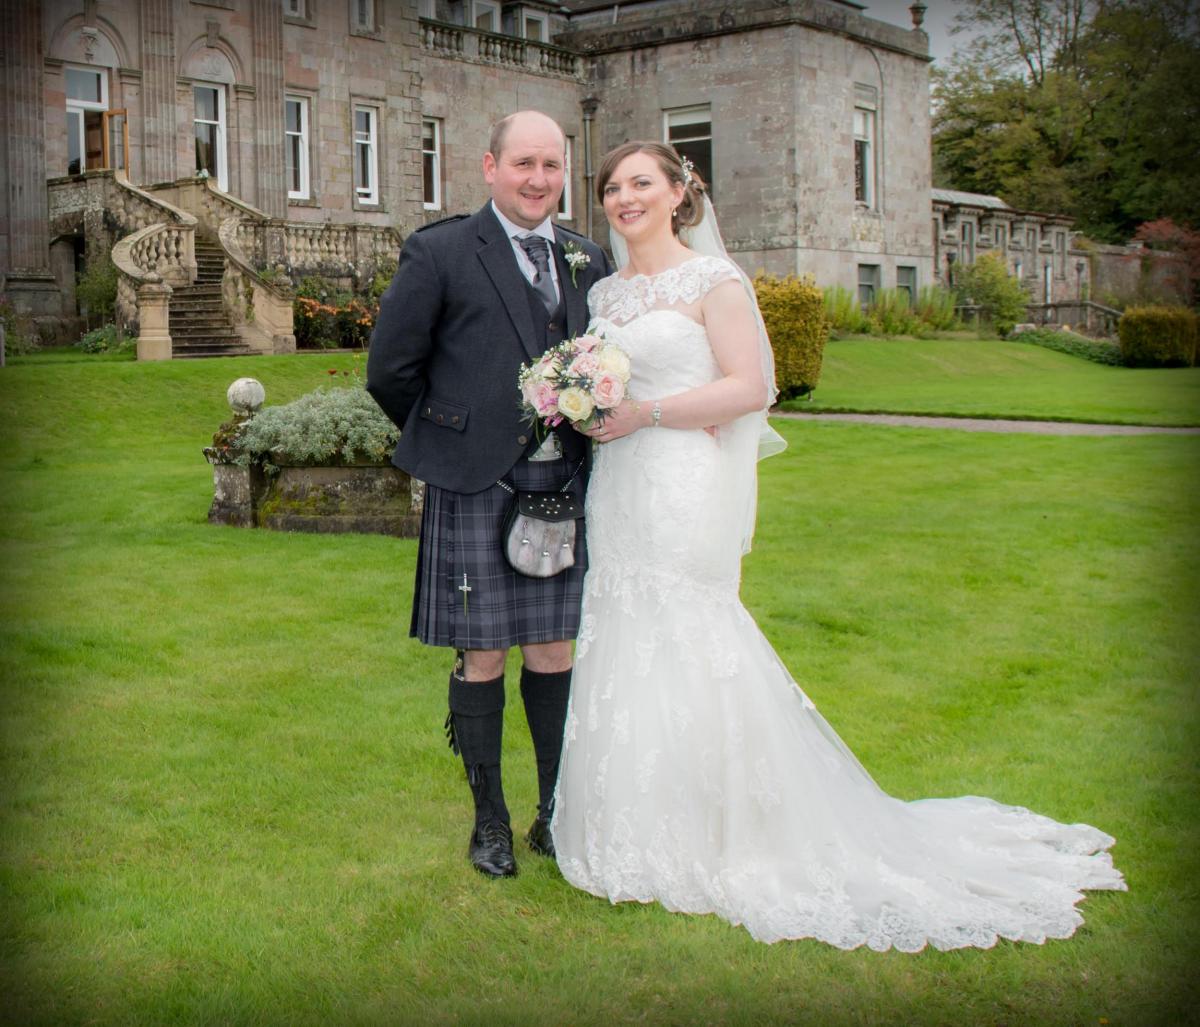 Heather Laurie, formerly of Snowden Close, Brampton, married Adrian Hall of Whitlawside, Canonbie, at Springkell, Eaglesfield Photo: Chris McBain